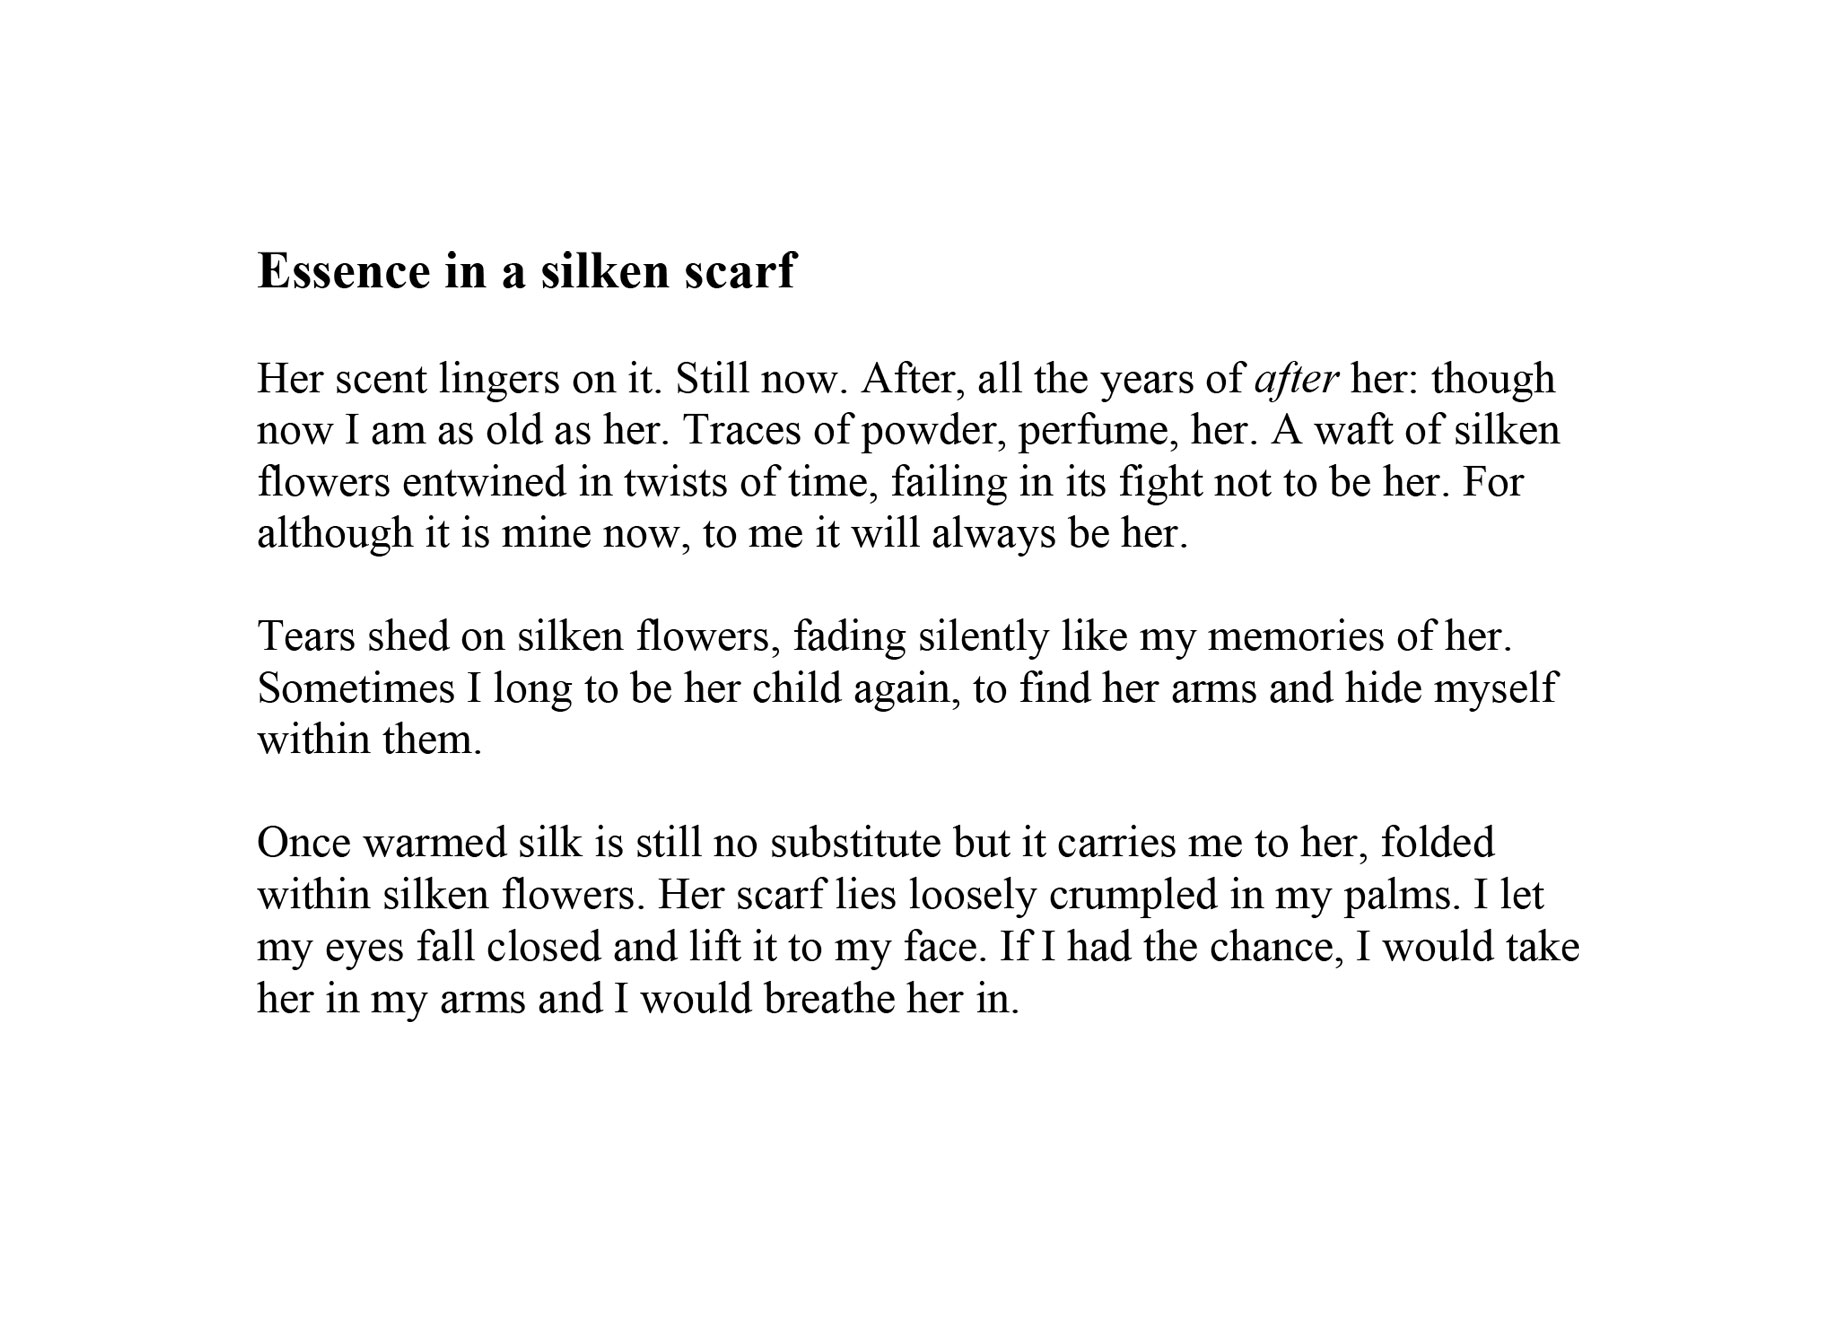 Ali Seegar<br />
Essence in a silken scarf</p>
<p>Her scent lingers on it. Still now. After, all the years of after her: though now I am as old as her. Traces of powder, perfume, her. A waft of silken flowers entwined in twists of time, failing in its fight not to be her. For although it is mine now, to me it will always be her. </p>
<p>Tears shed on silken flowers, fading silently like my memories of her. Sometimes I long to be her child again, to find her arms and hide myself within them. </p>
<p>Once warmed silk is still no substitute but it carries me to her, folded within silken flowers. Her scarf lies loosely crumpled in my palms. I let my eyes fall closed and lift it to my face. If I had the chance, I would take her in my arms and I would breathe her in.